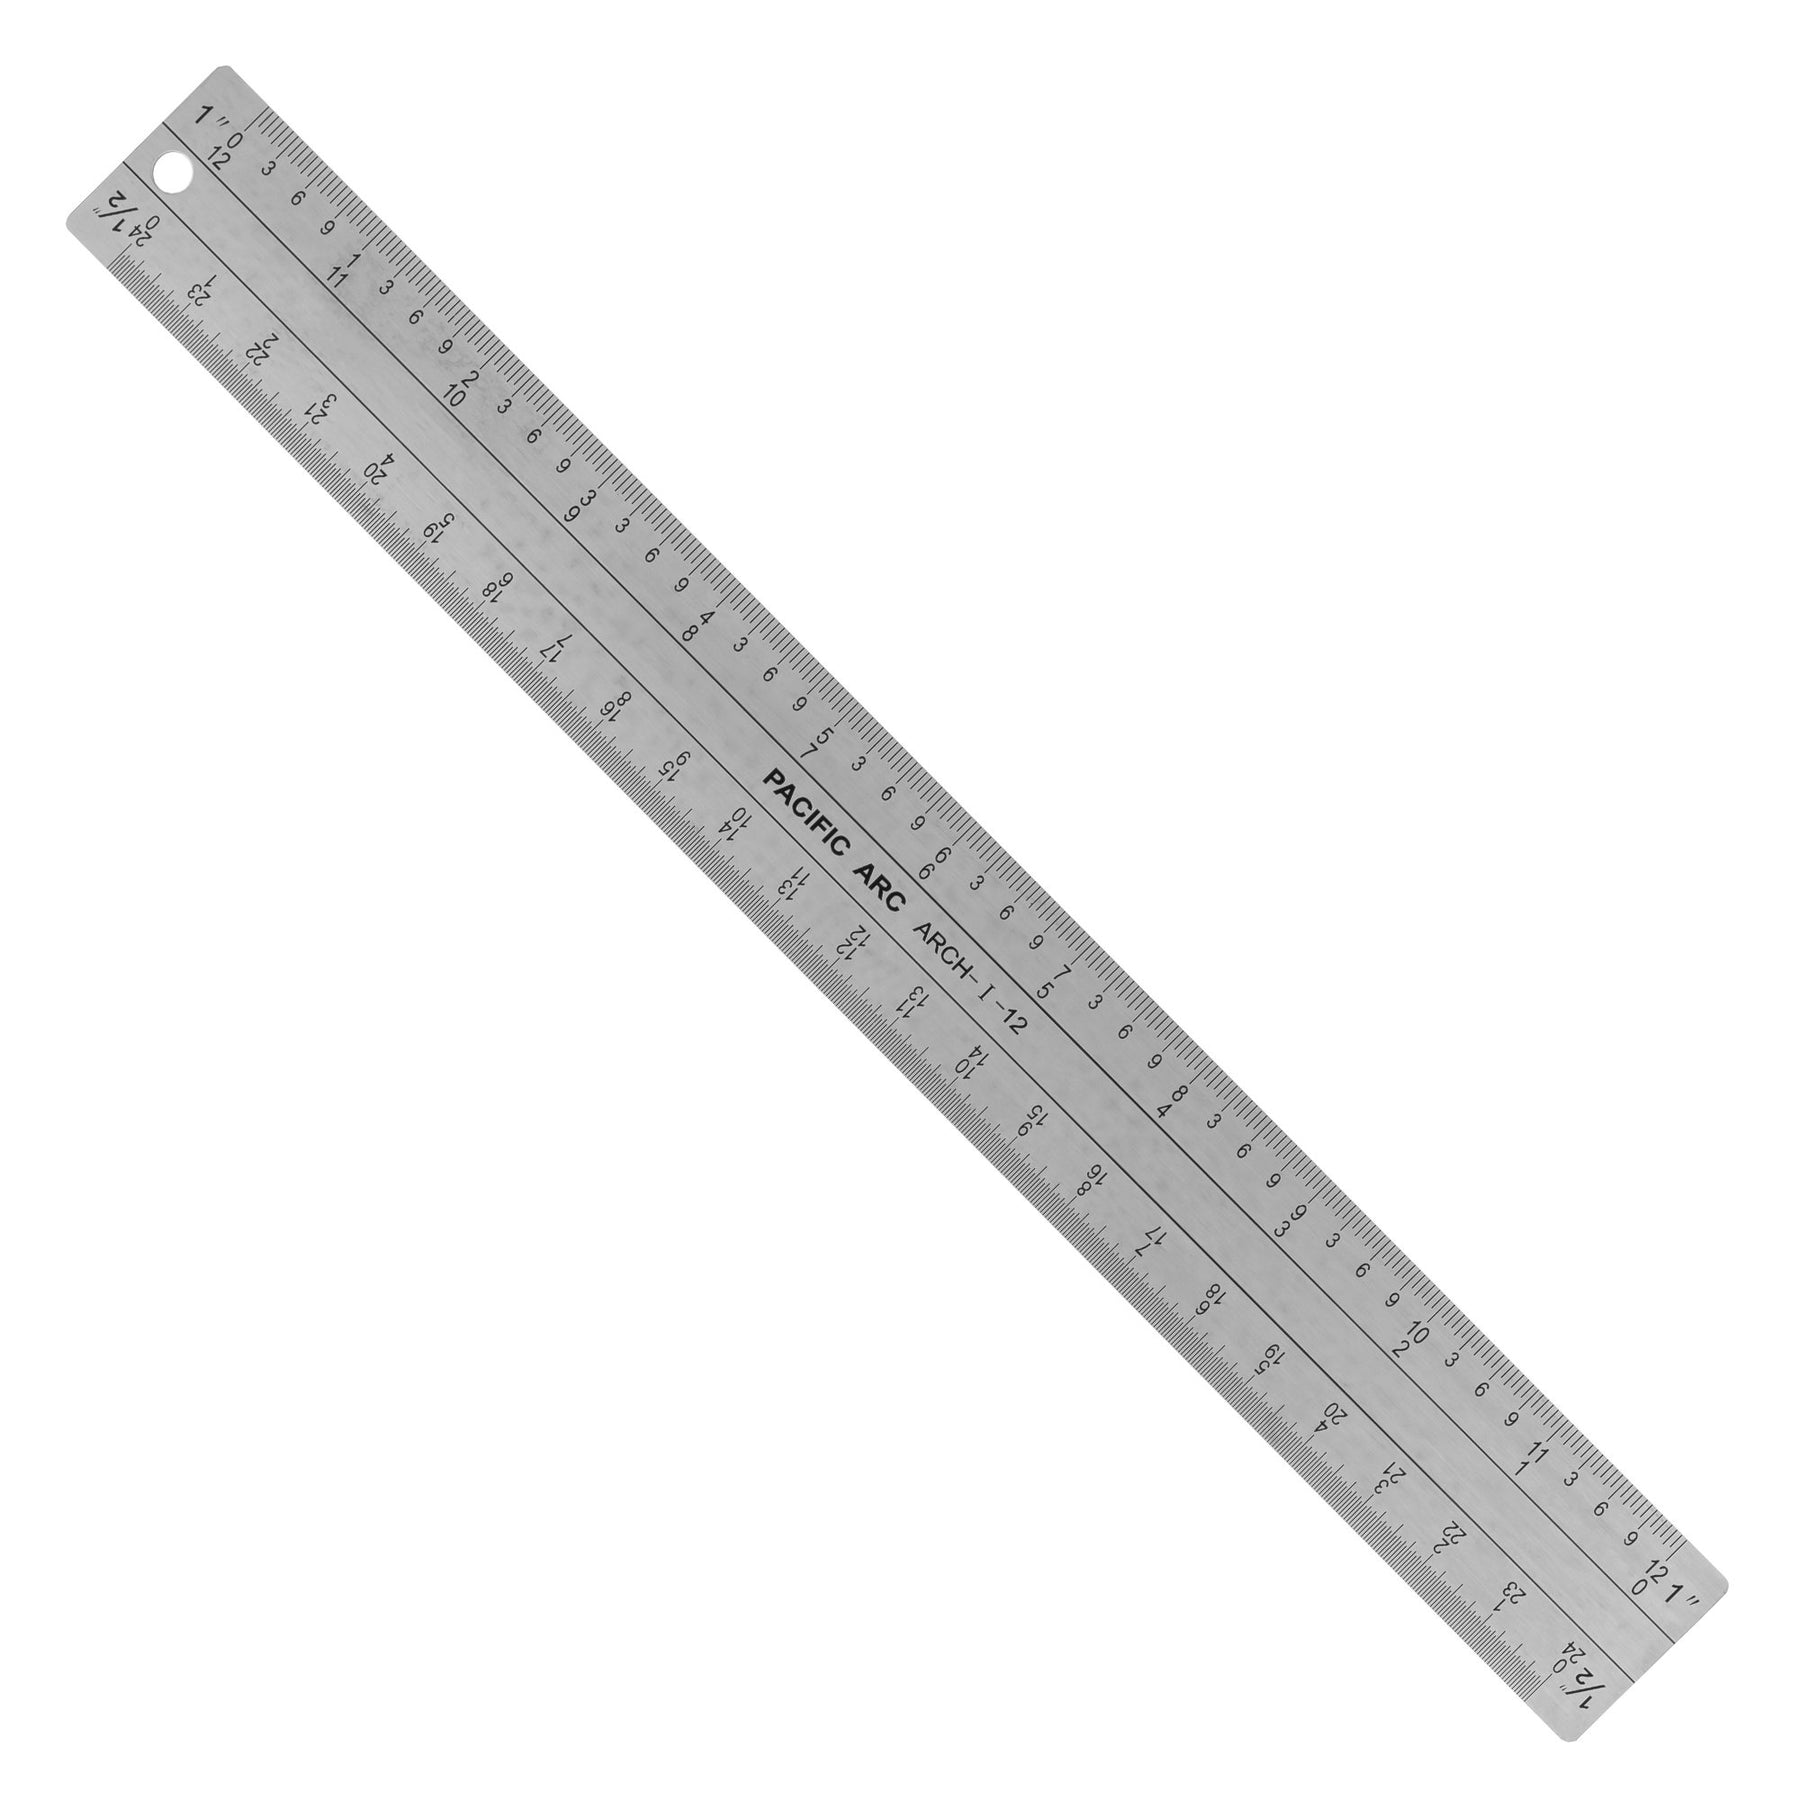 Architect Scale 12-inch Ruler - Printable Ruler